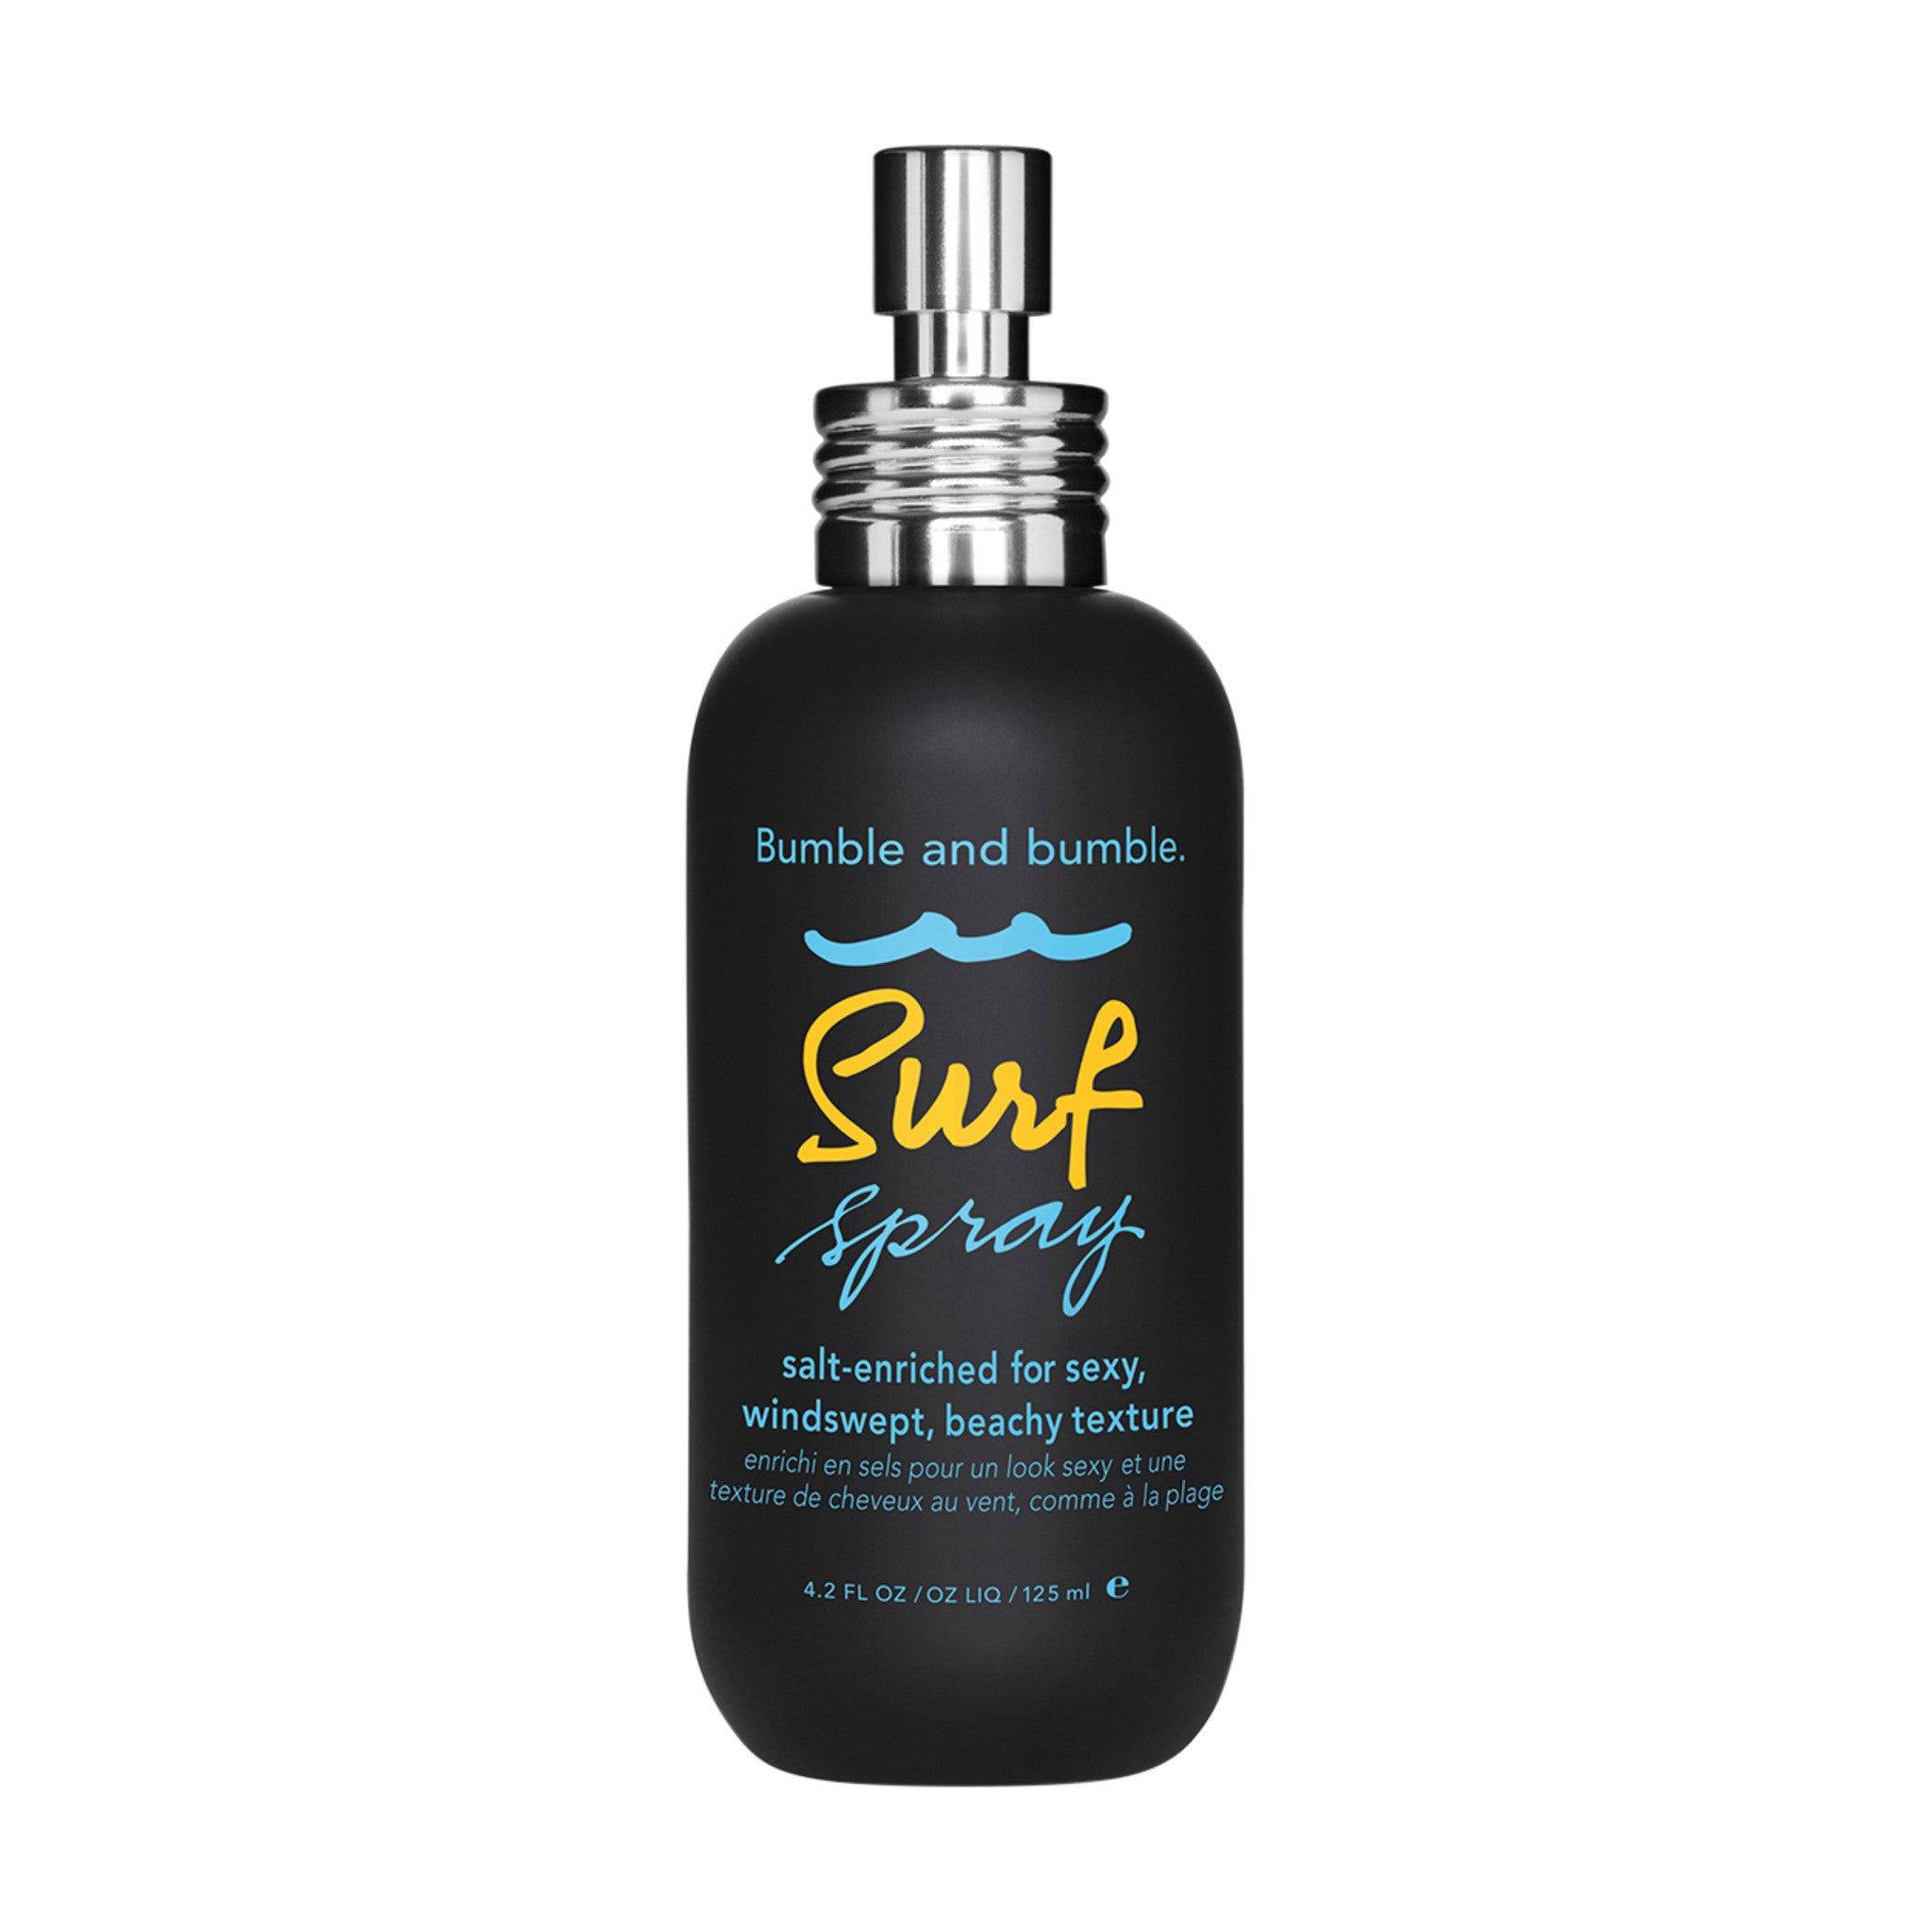 Bumble and Bumble Surf Spray Beach Waves Size variant: 4 Oz. main image.